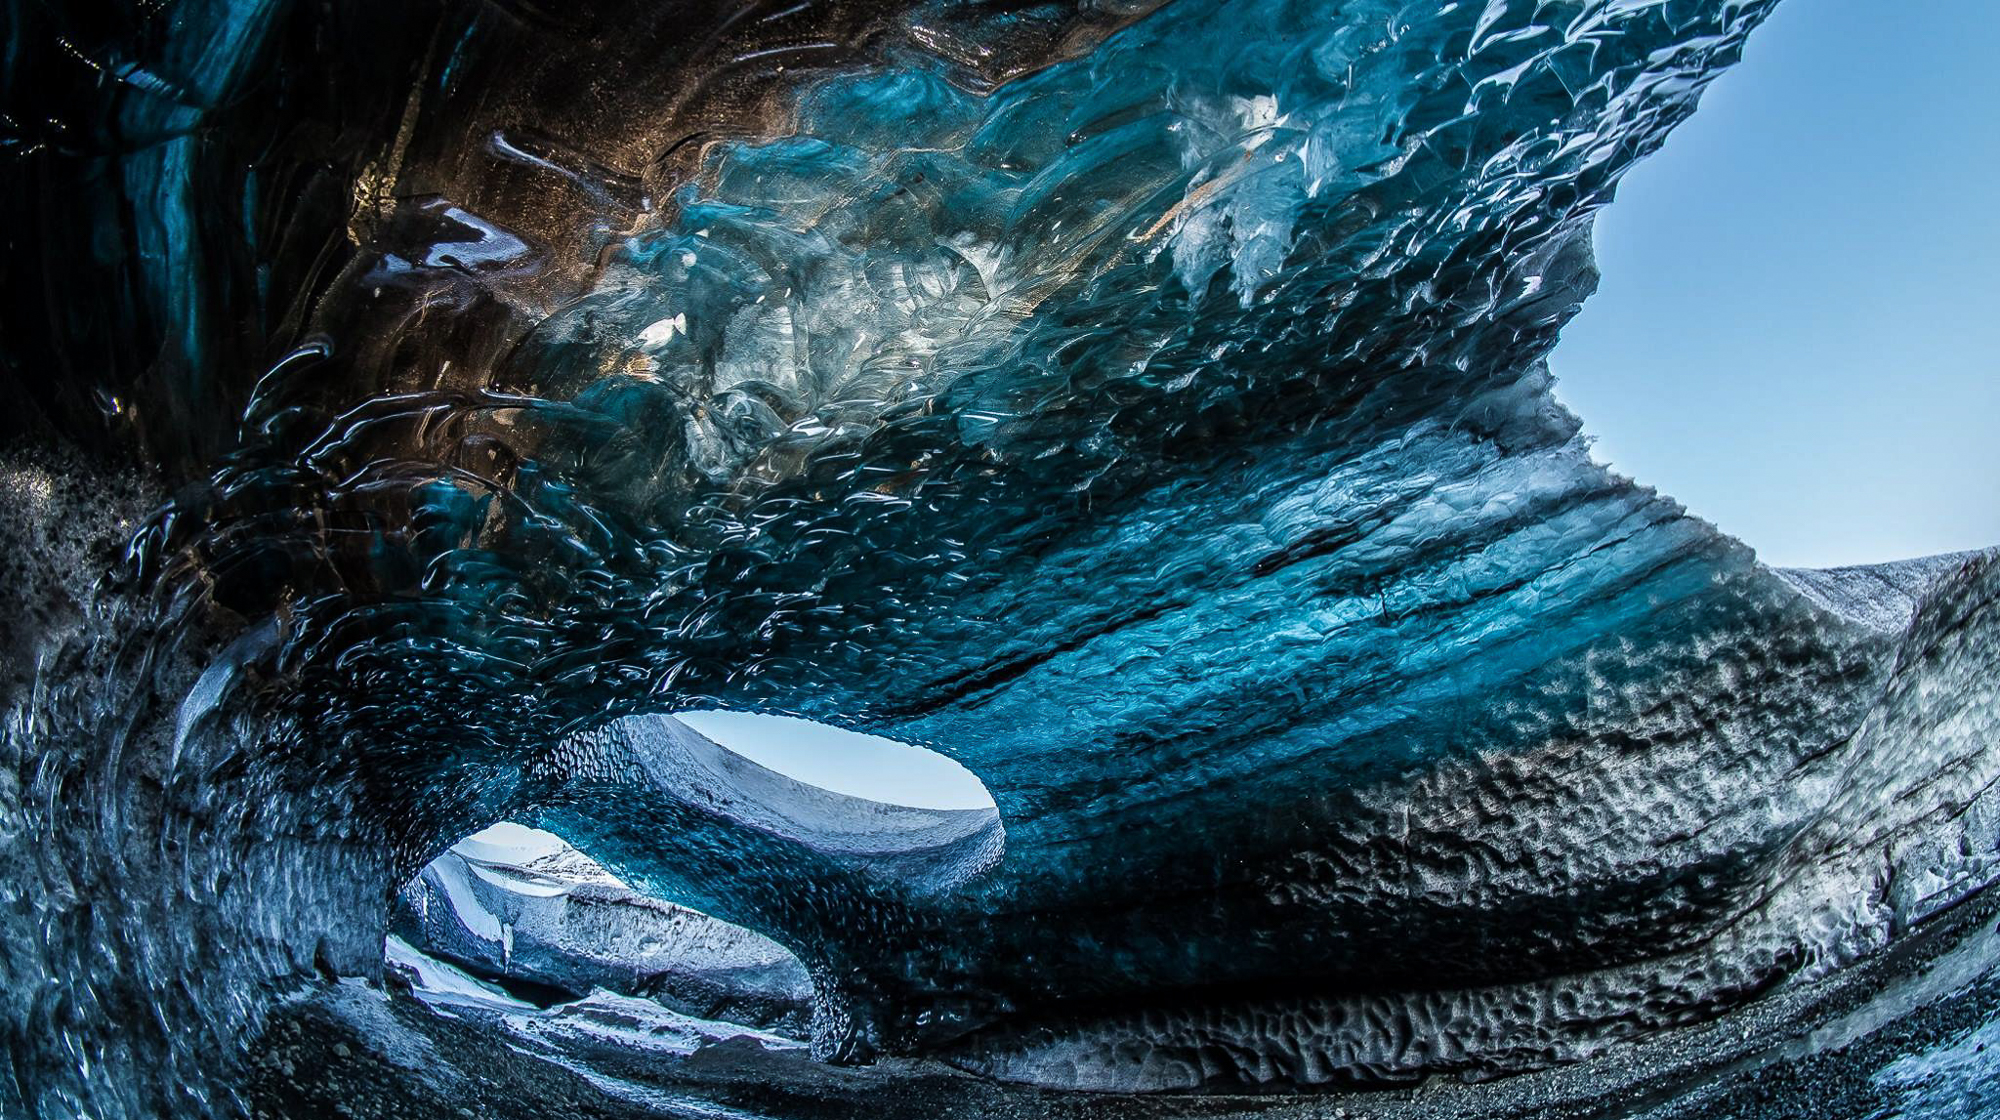 Masterpieces created by the ever-changing Arctic nature.  JONAA©Agust Runarsson